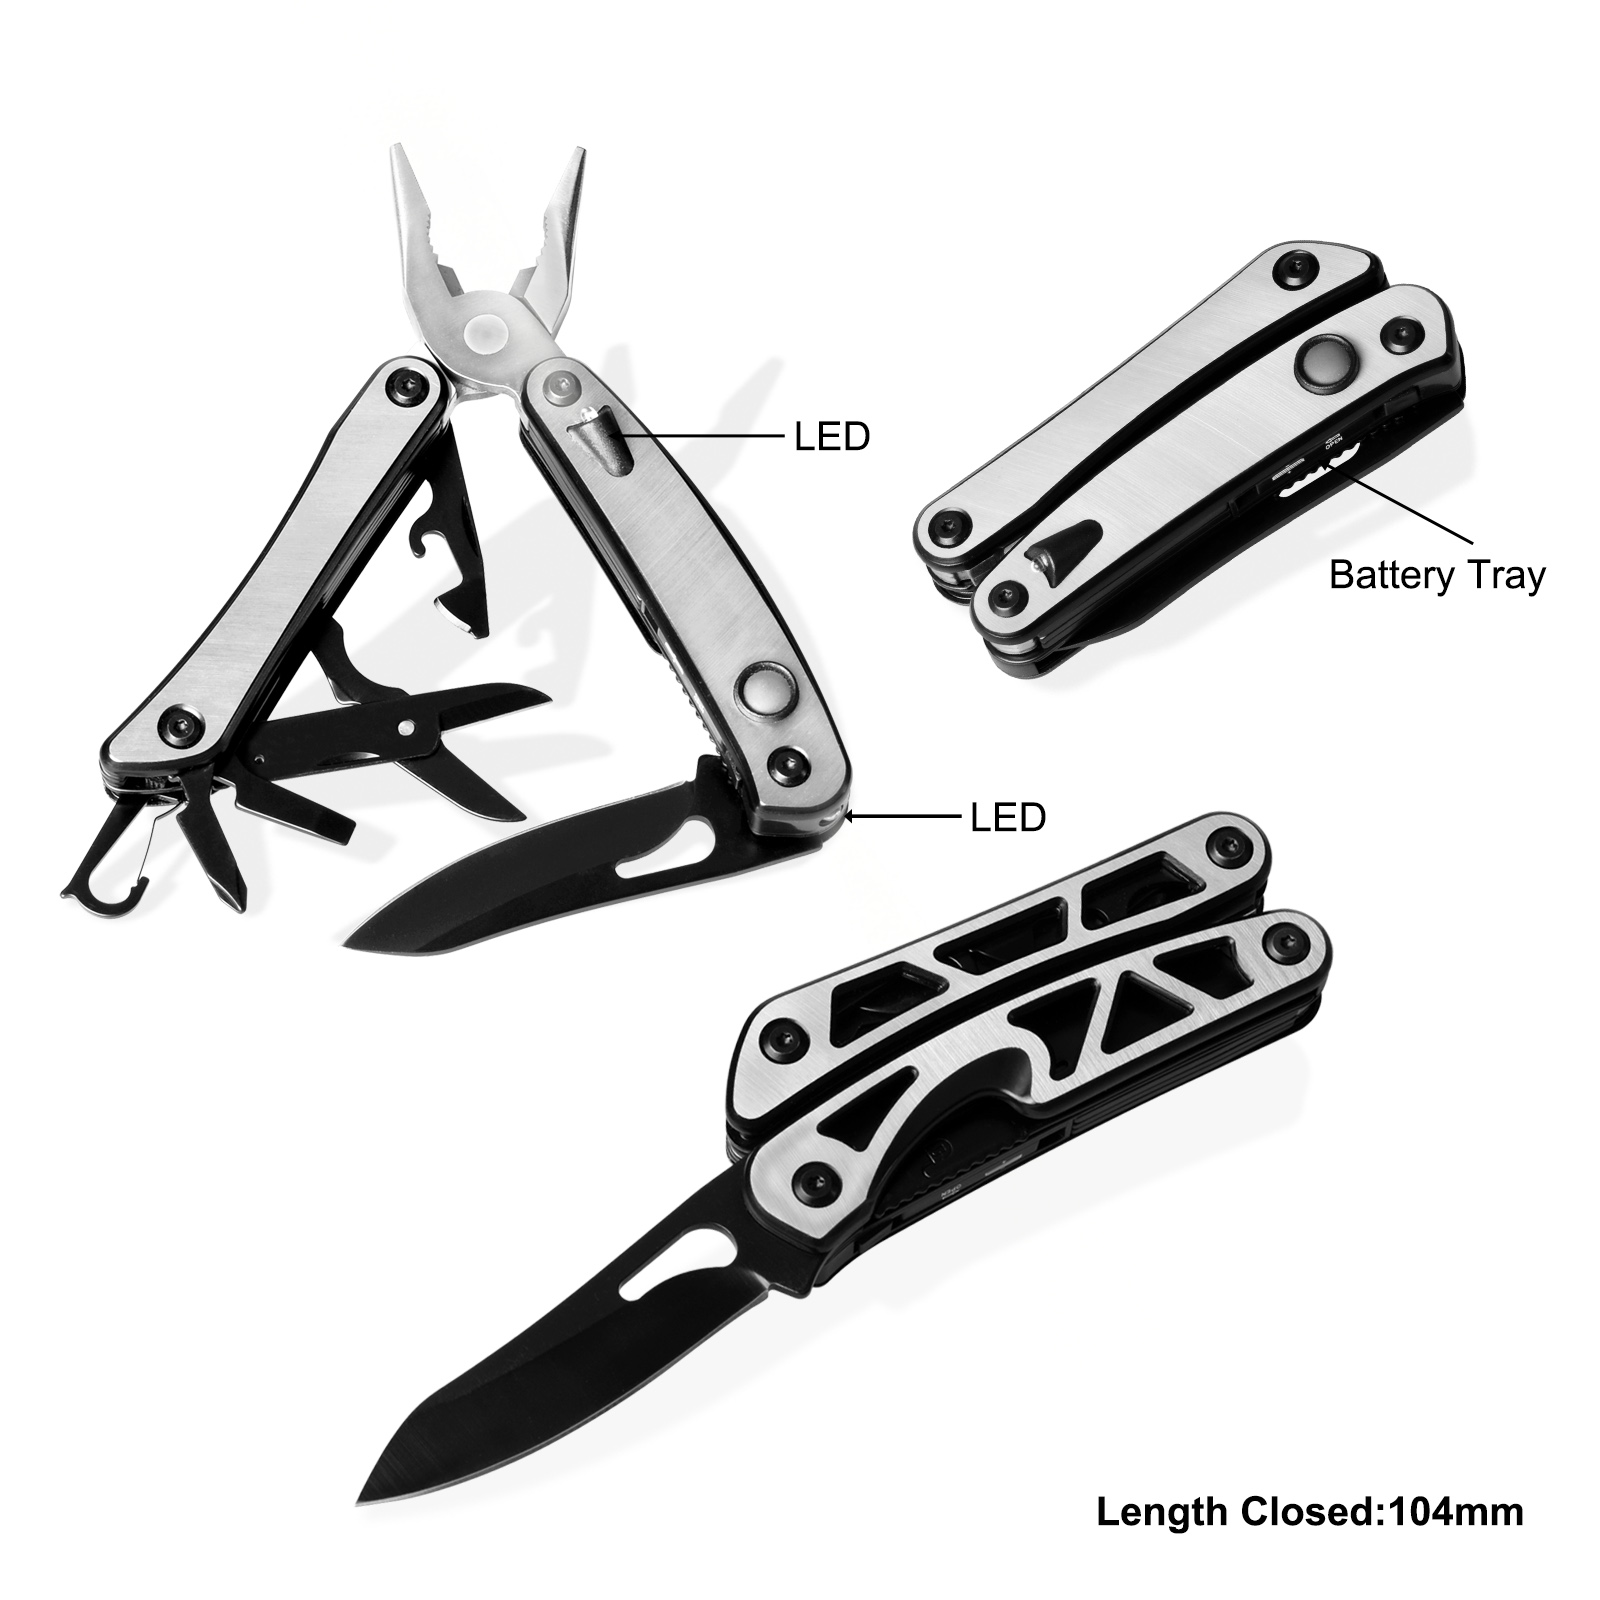 #8146BS Top highest quality multi-fucntion tool with 2 LED